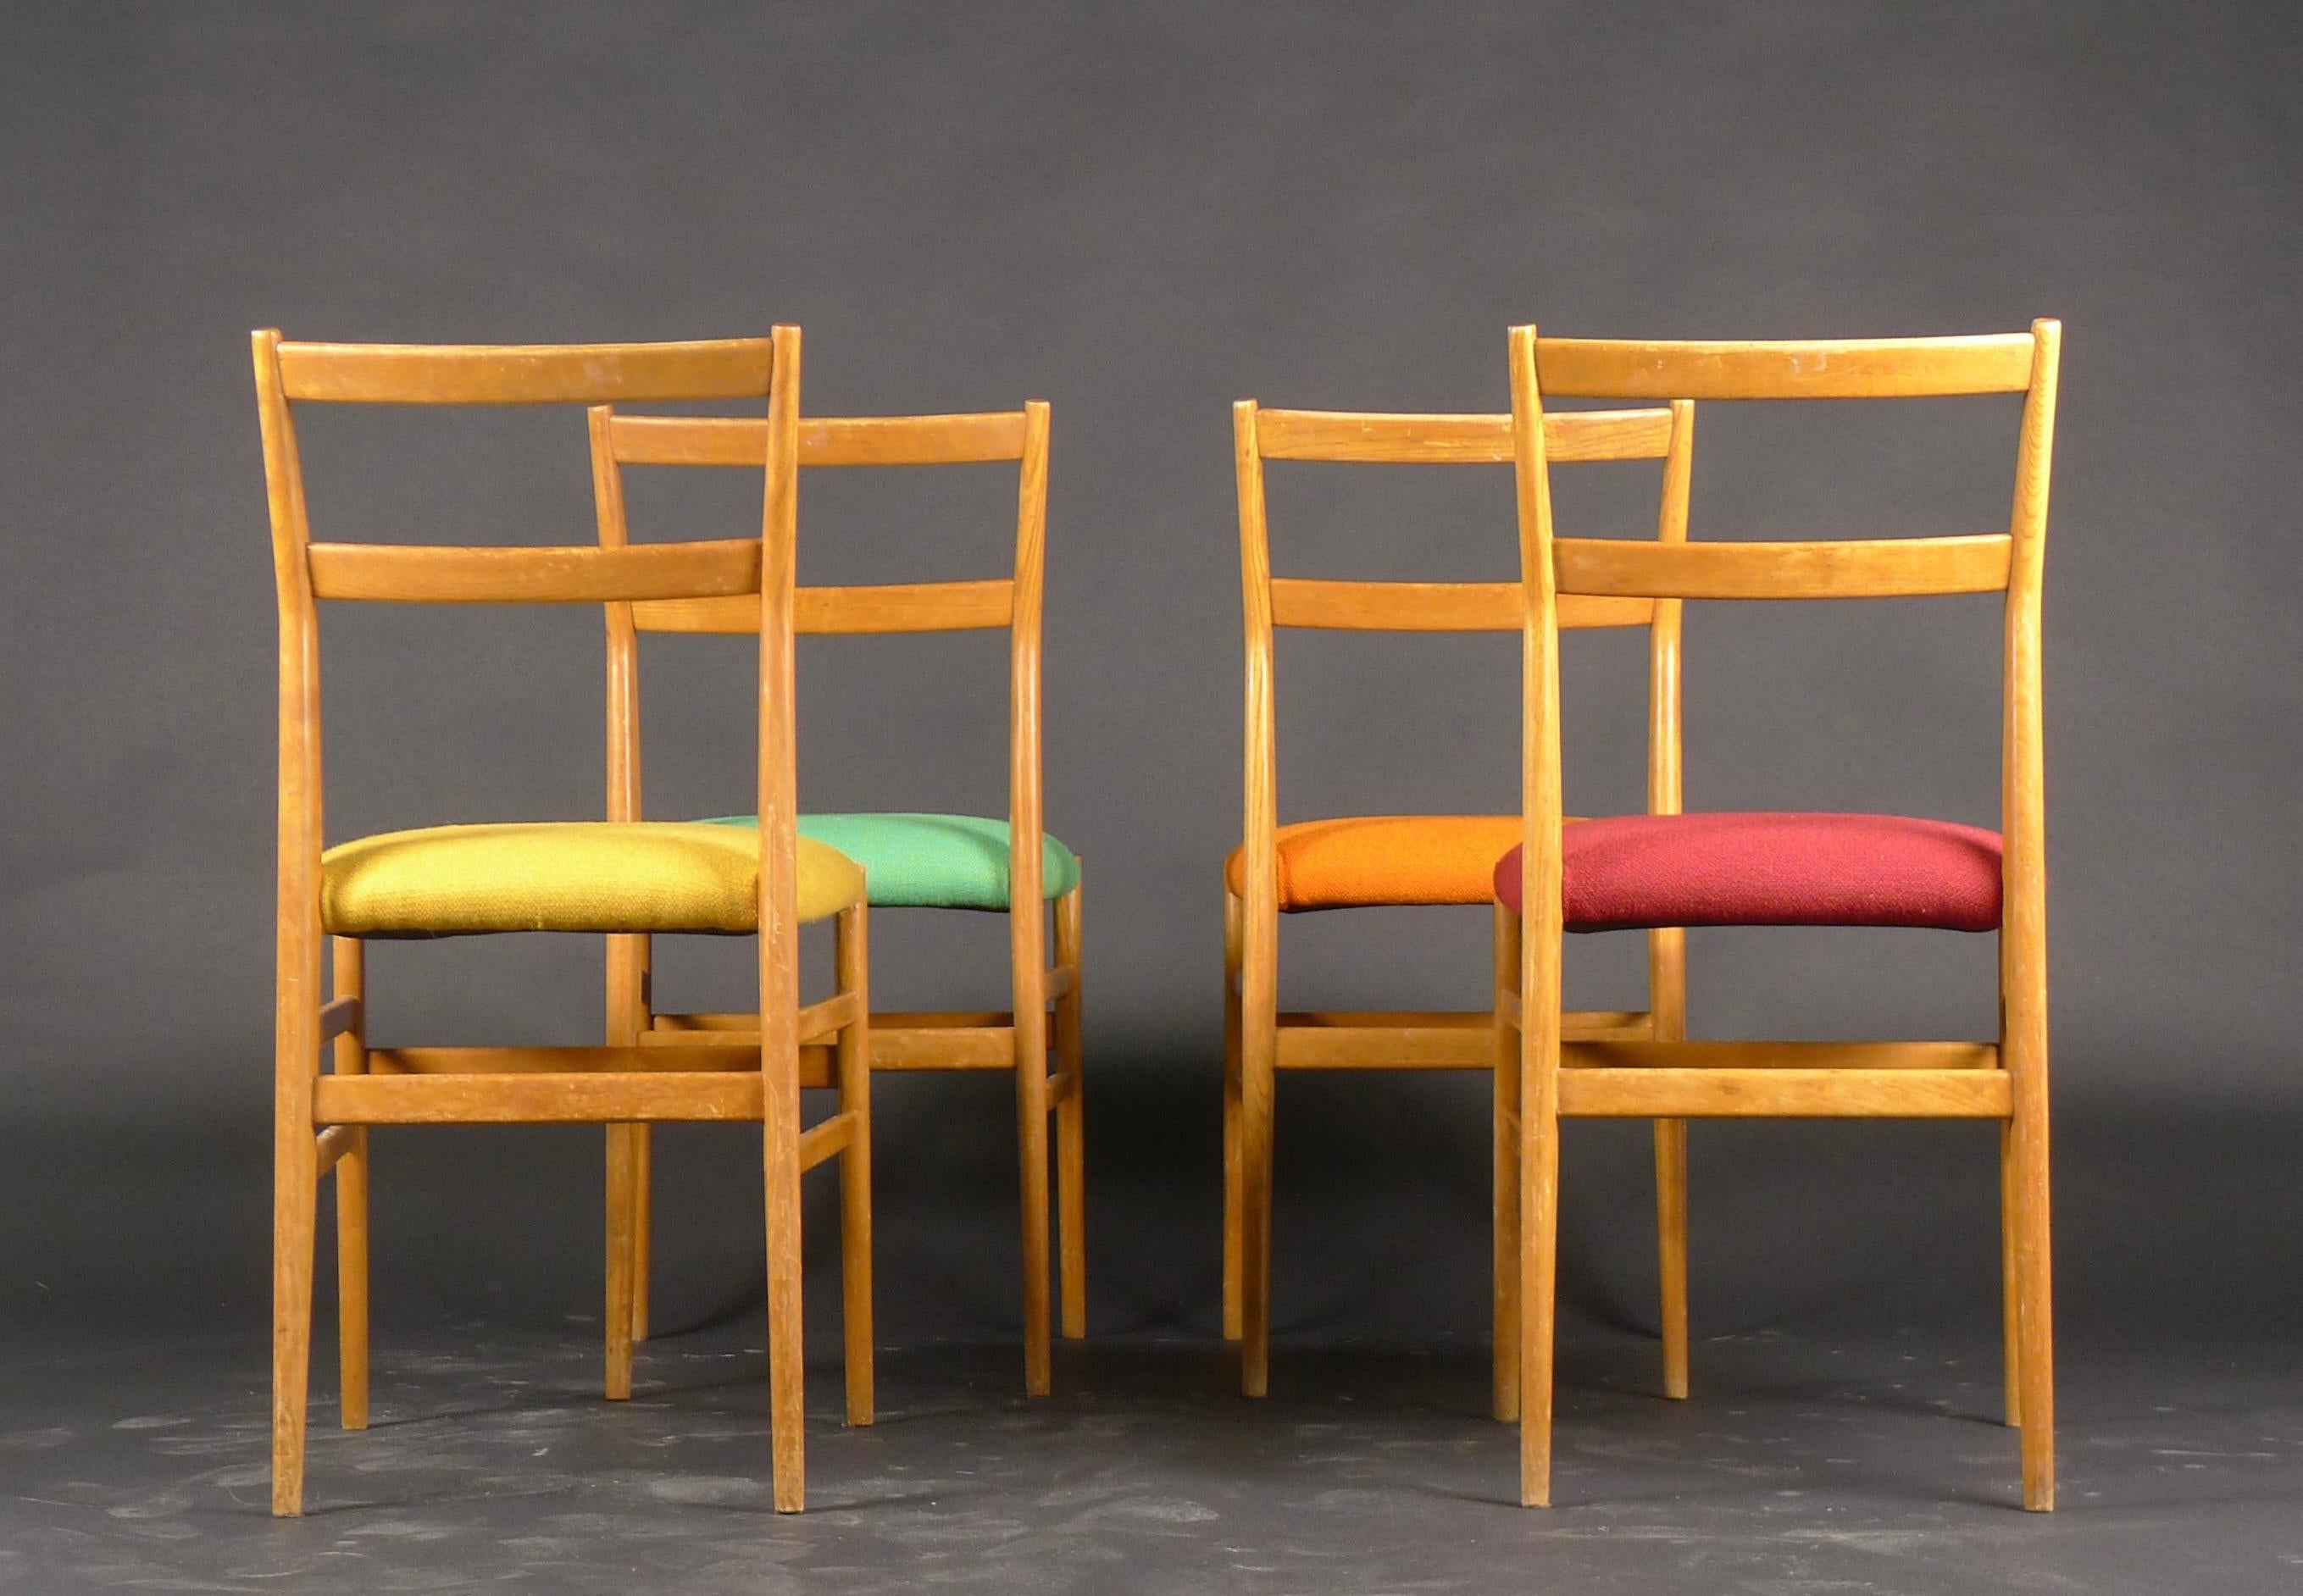 Gio Ponti for Cassina, Harlequin Set of Leggera Chairs, Model 646 in Ash, 1950s For Sale 3